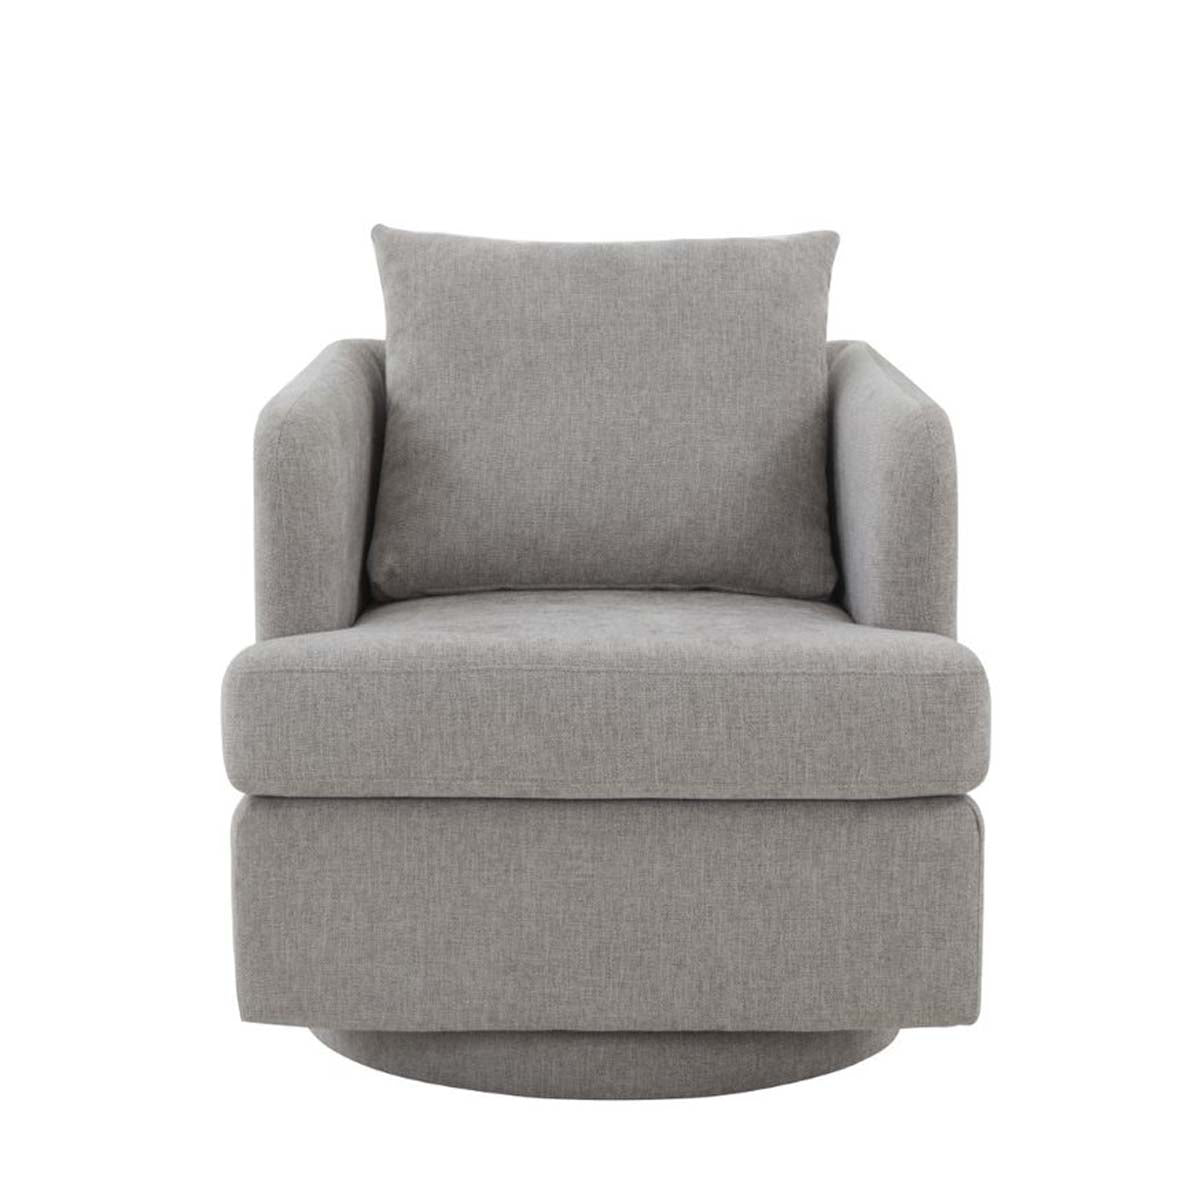 Safavieh Couture Abbelina Swivel Accent Chair